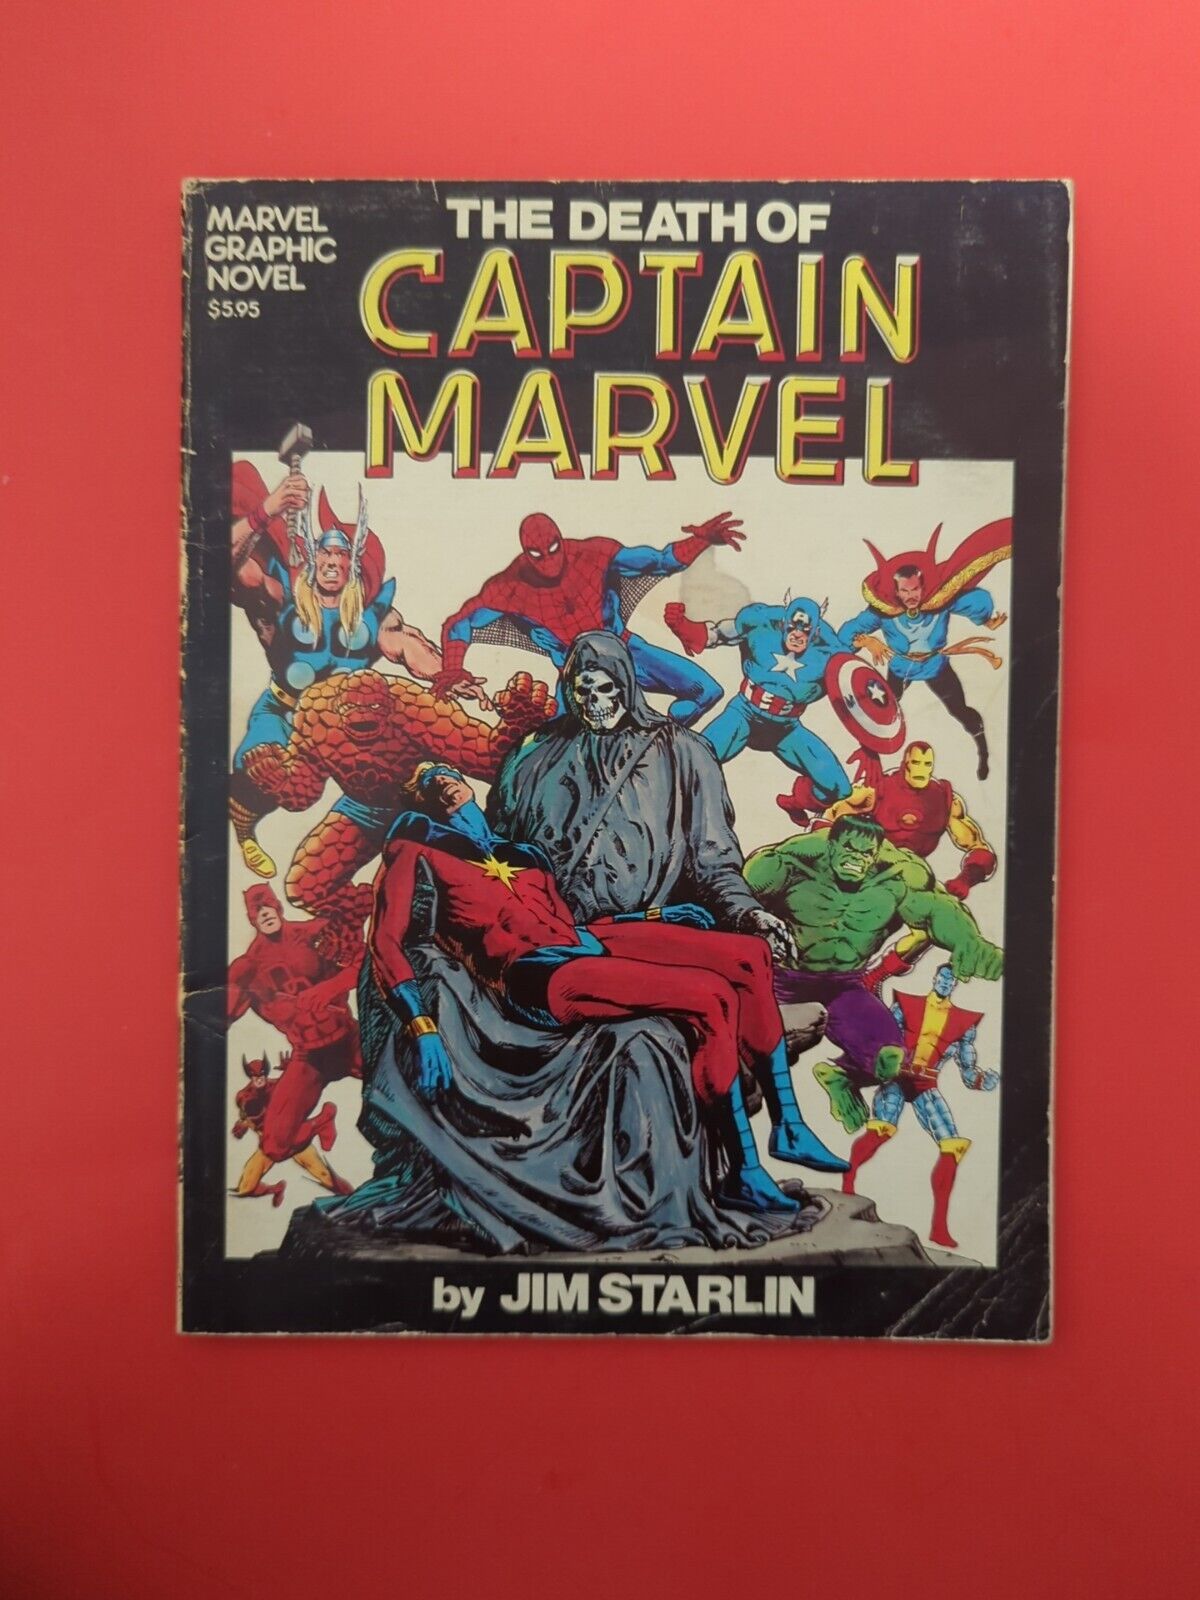 The Death of Captain Marvel 1st PRINT Rare Marvel Graphic Novel by Jim Starlin 